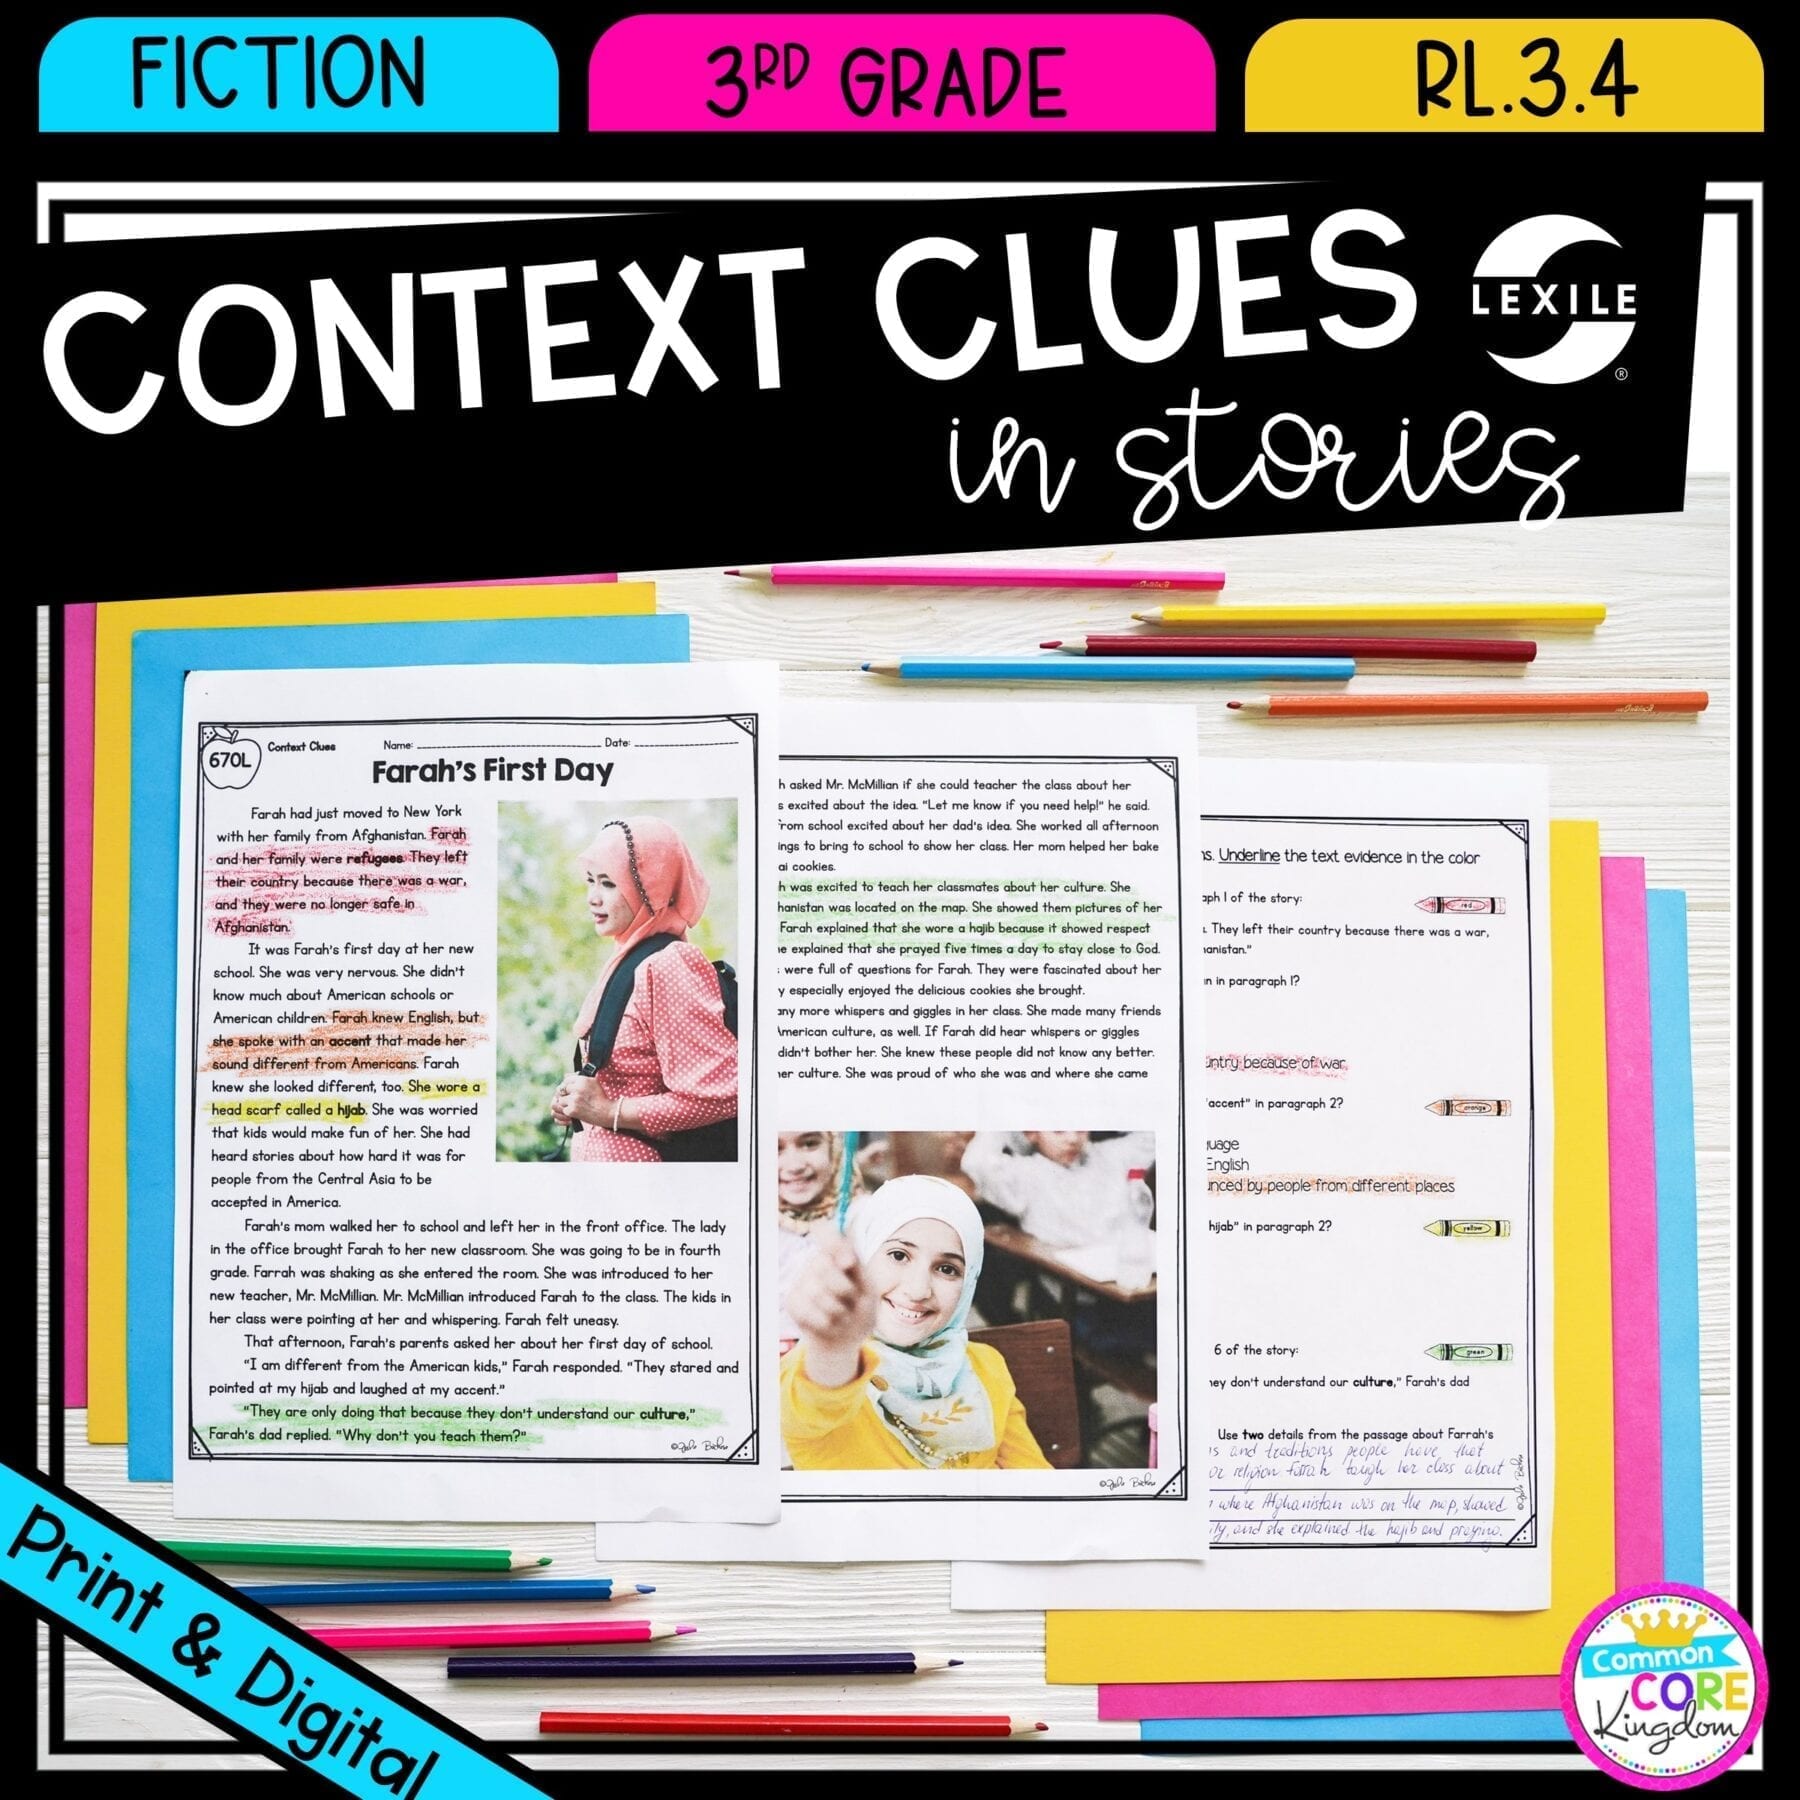 Context Clues in Fiction Stories for 3rd grade cover showing printable & digital worksheets